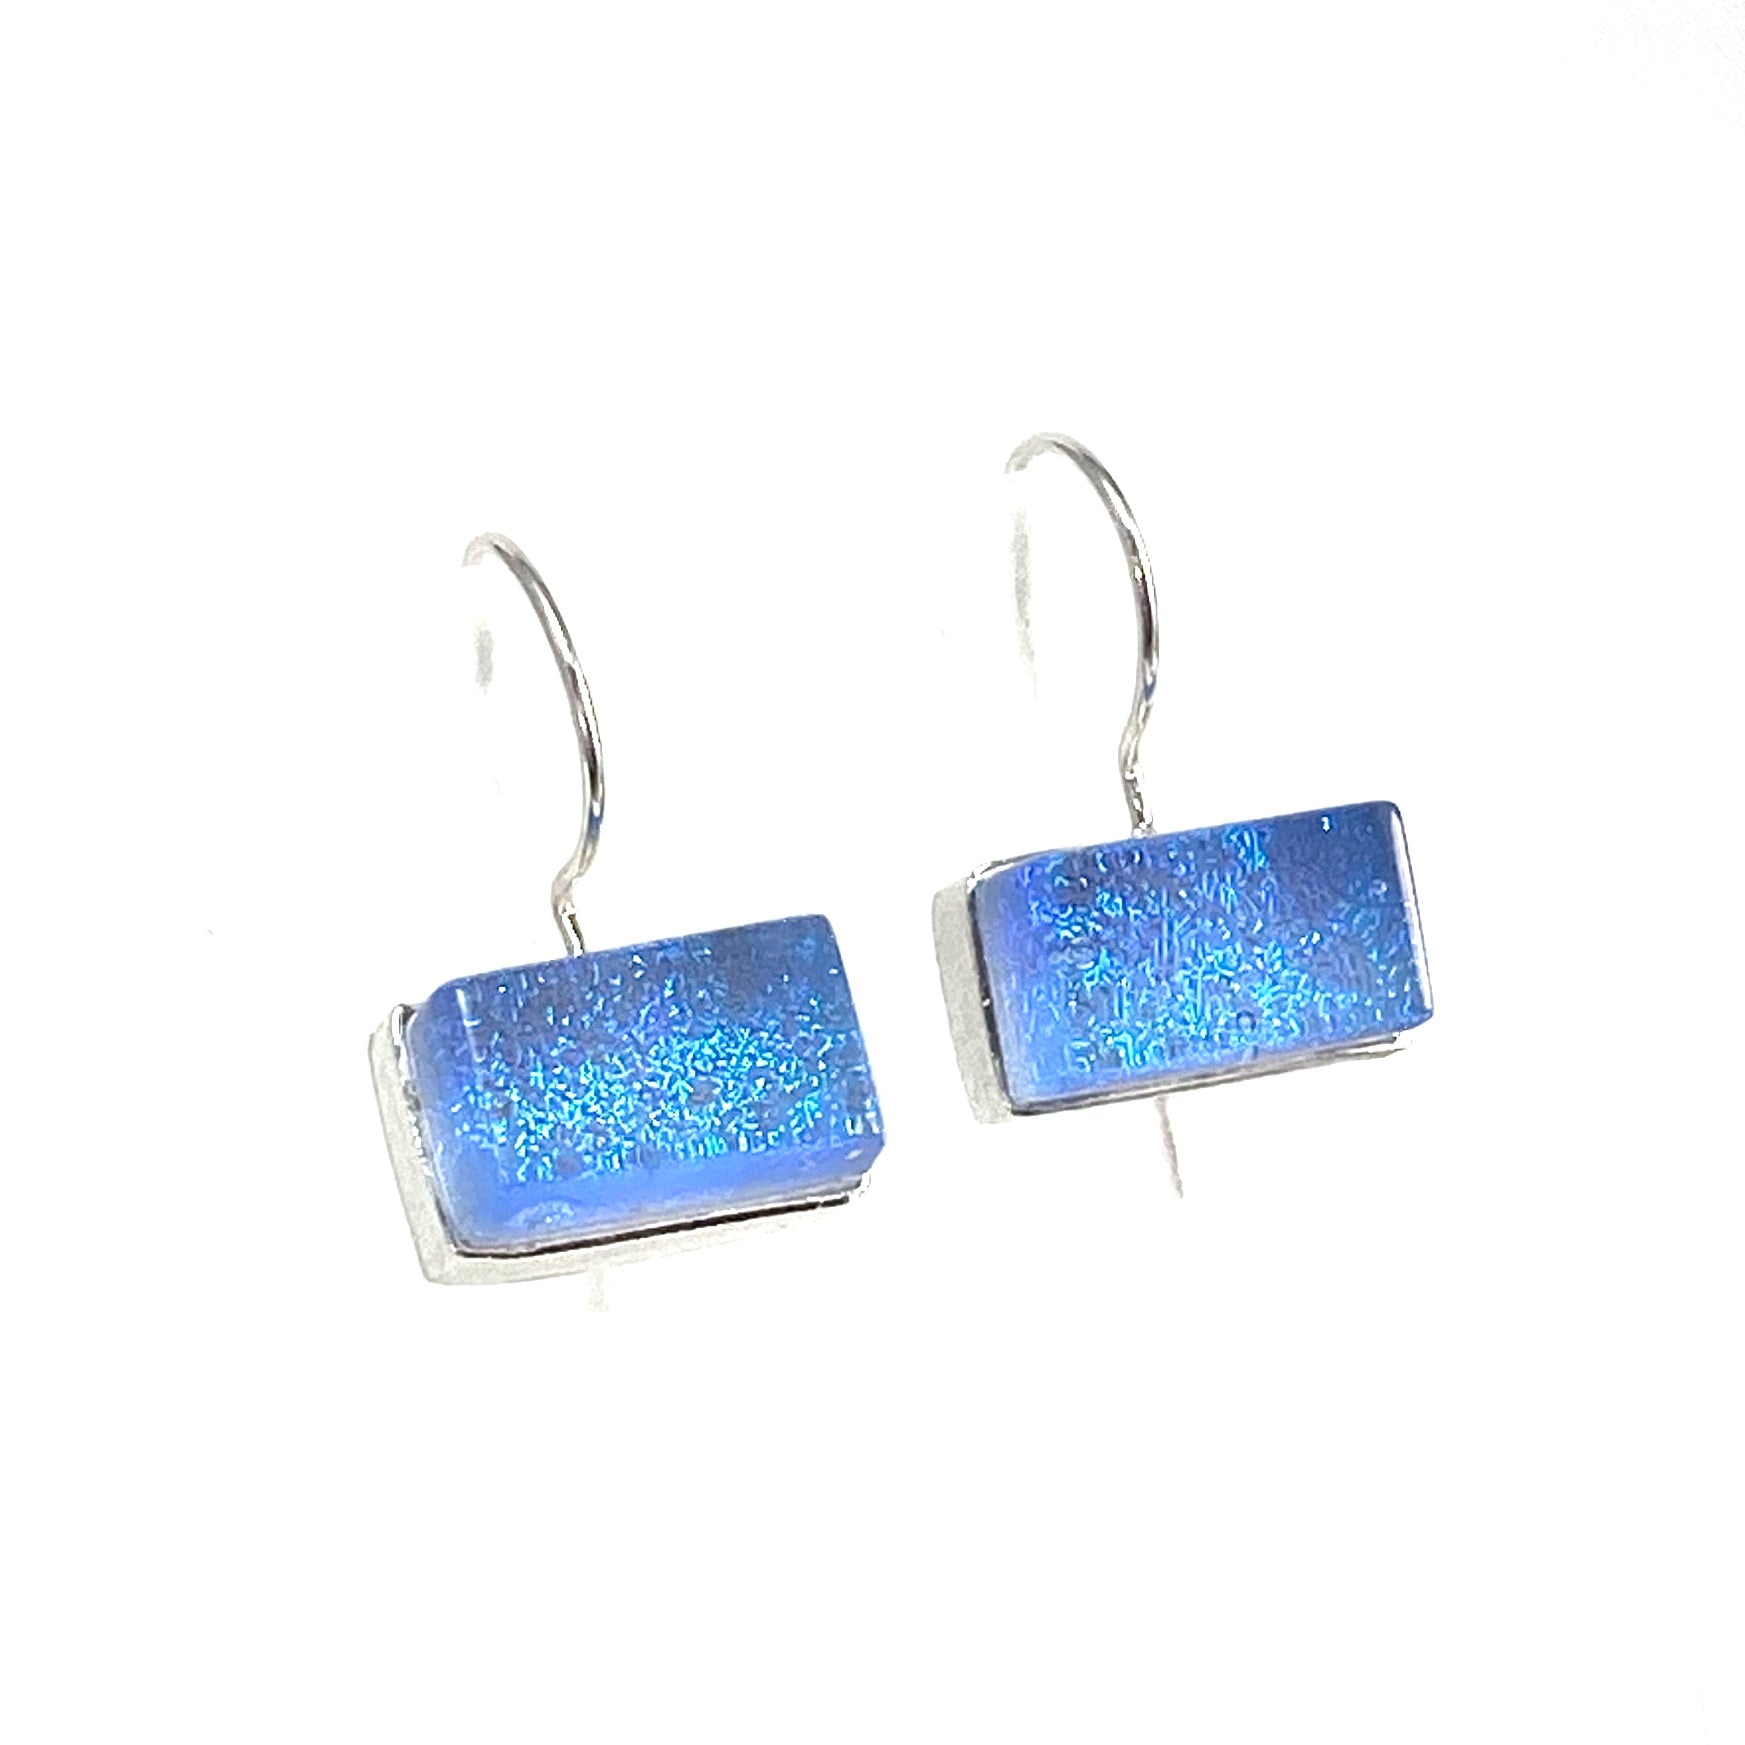 sky blue, rectangle earrings, fused glass, glass jewelry, glass and silver jewelry, handmade, handcrafted, American Craft, hand fabricated jewelry, hand fabricated jewellery,  Athen, Georgia, colorful jewelry, sparkle, bullseye glass, dichroic glass, art jewelry